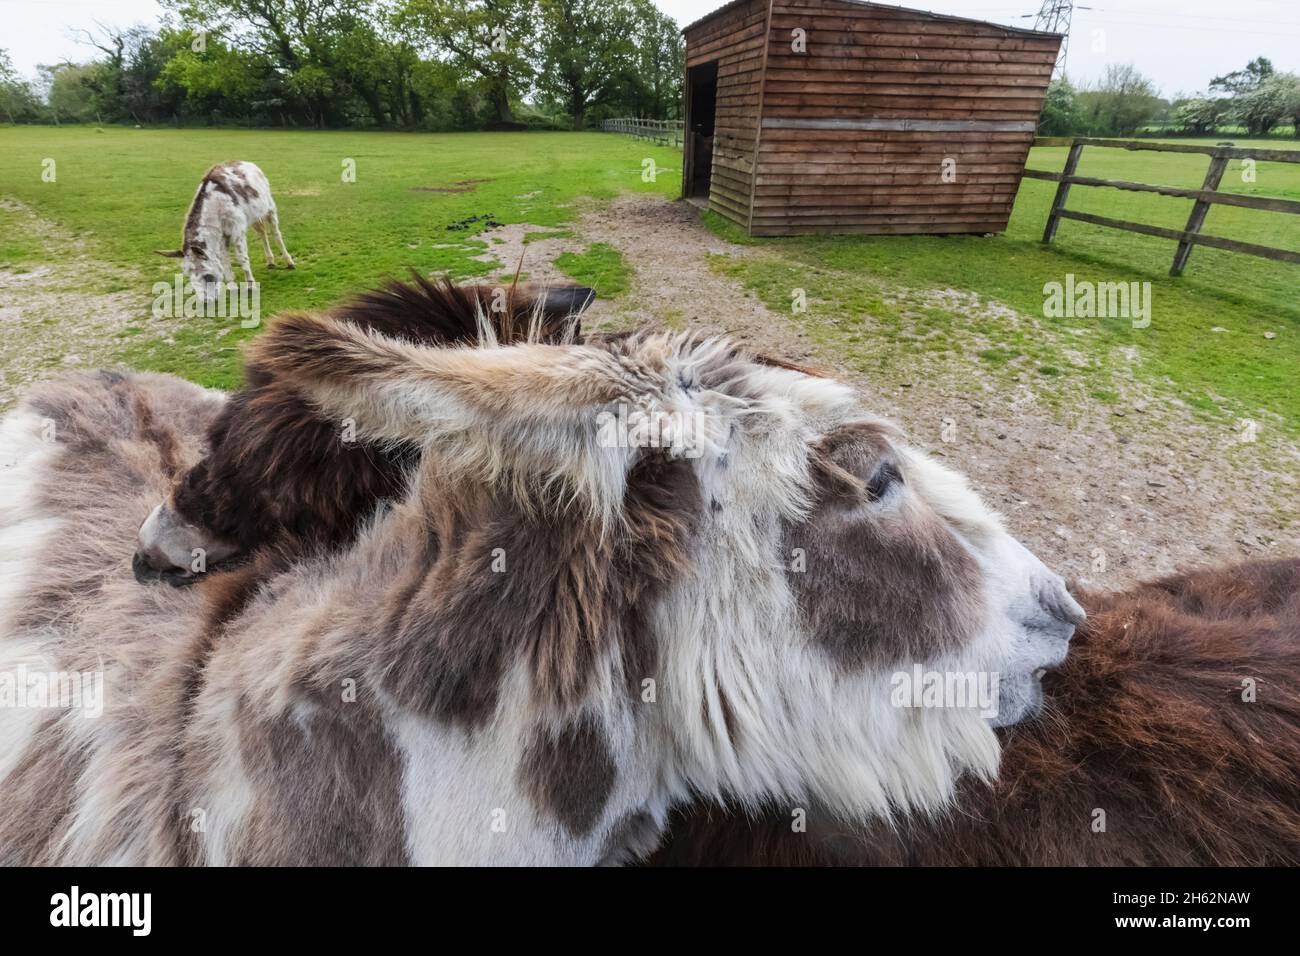 england,hampshire,new forest,new milton,the sammy miller motorcycle museum,the animal farm,donkeys Stock Photo